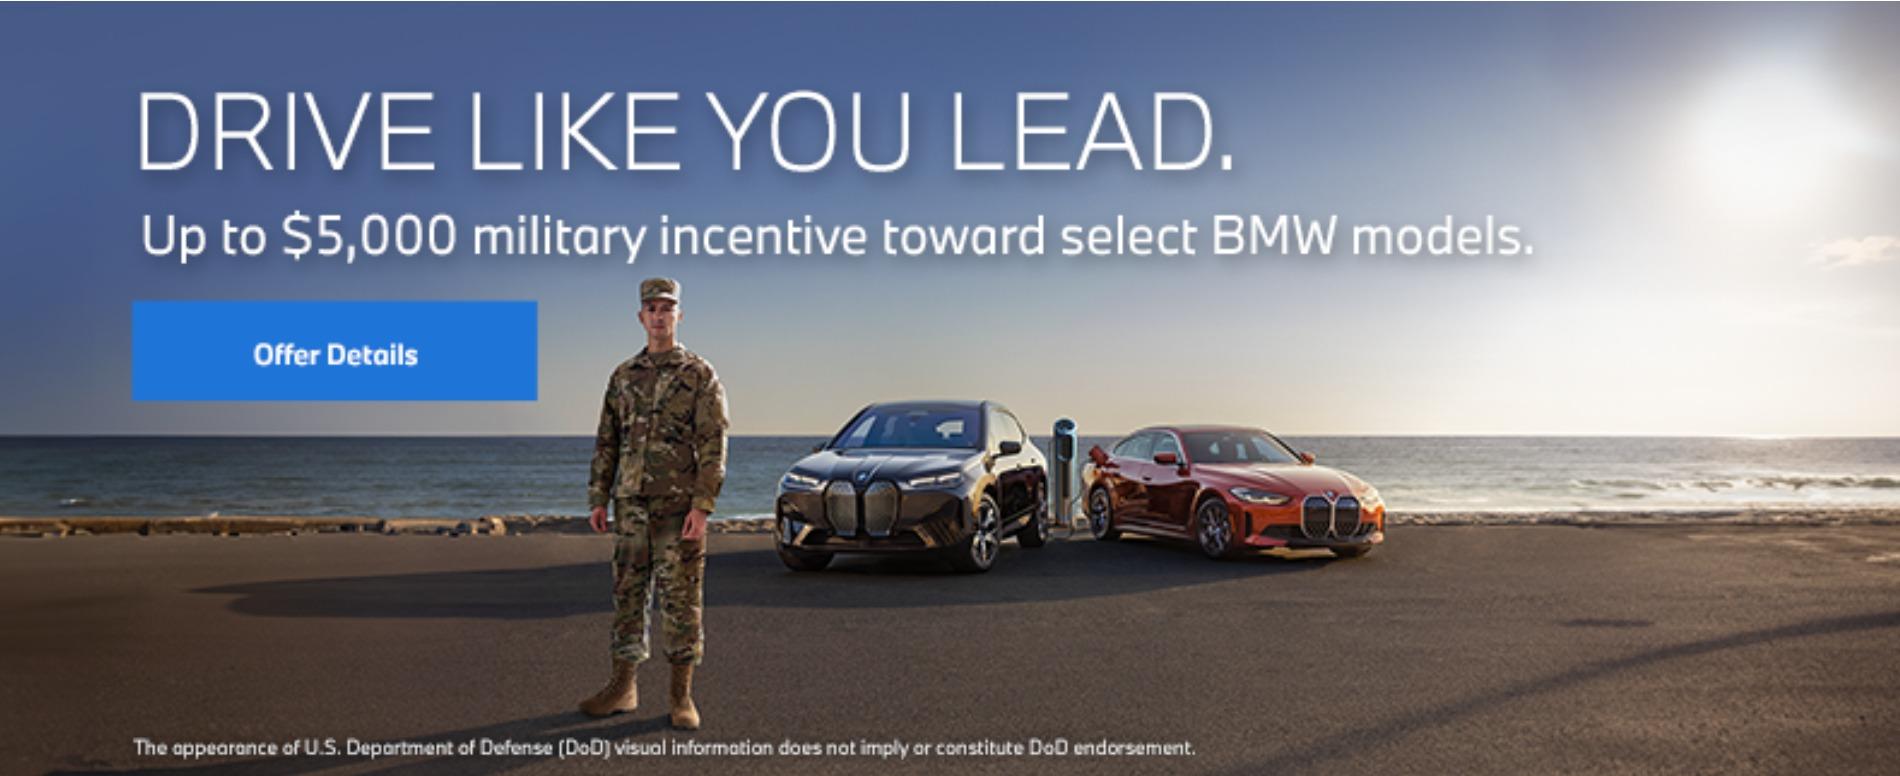 Up To $5,000 military incentive toward select BMW models.